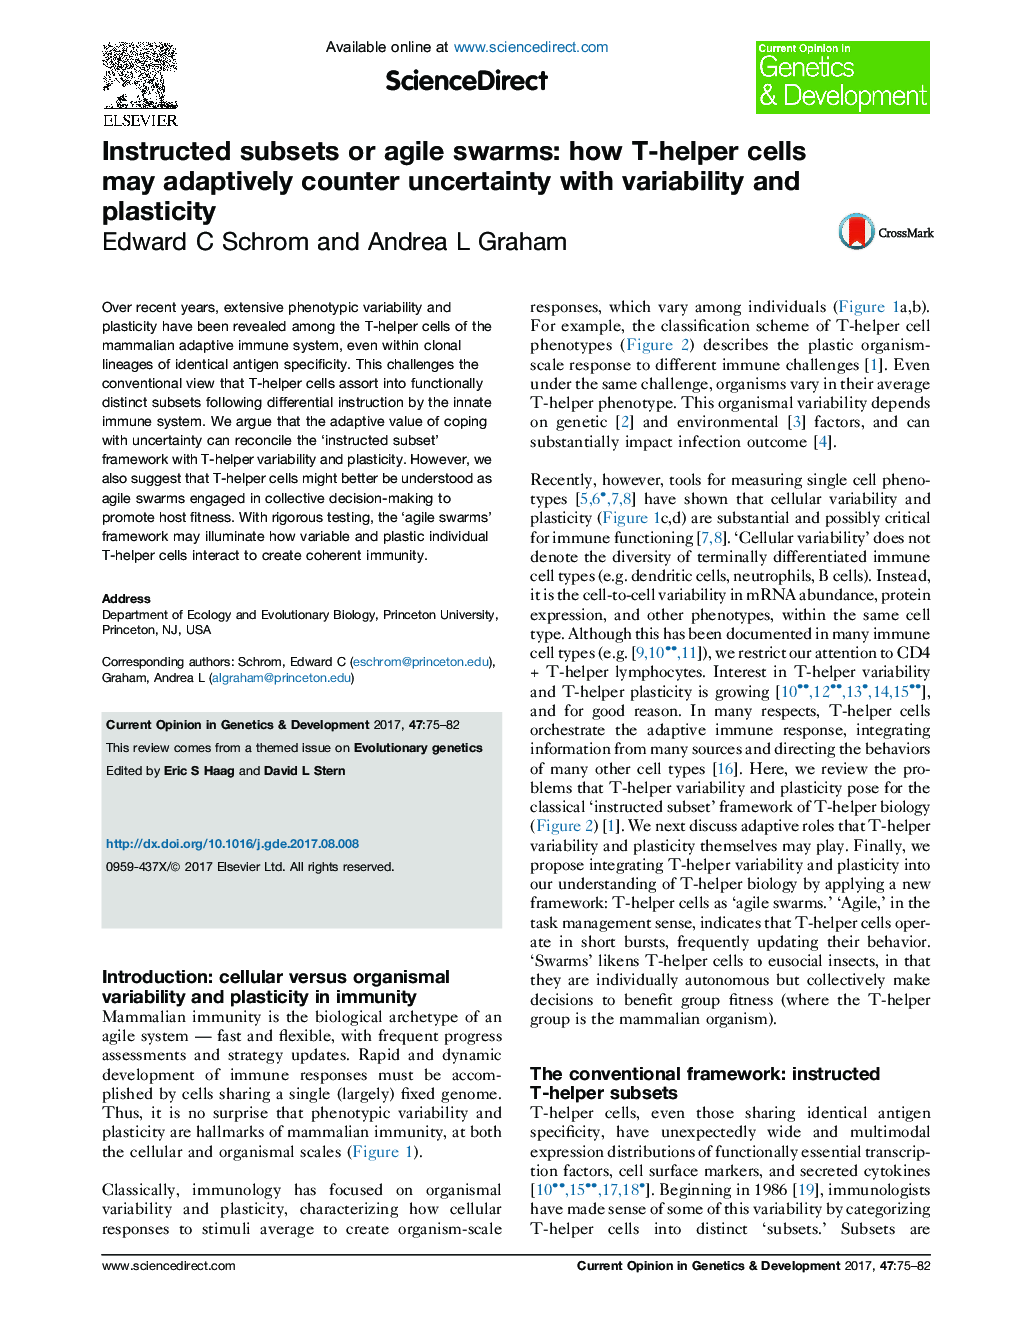 Instructed subsets or agile swarms: how T-helper cells may adaptively counter uncertainty with variability and plasticity